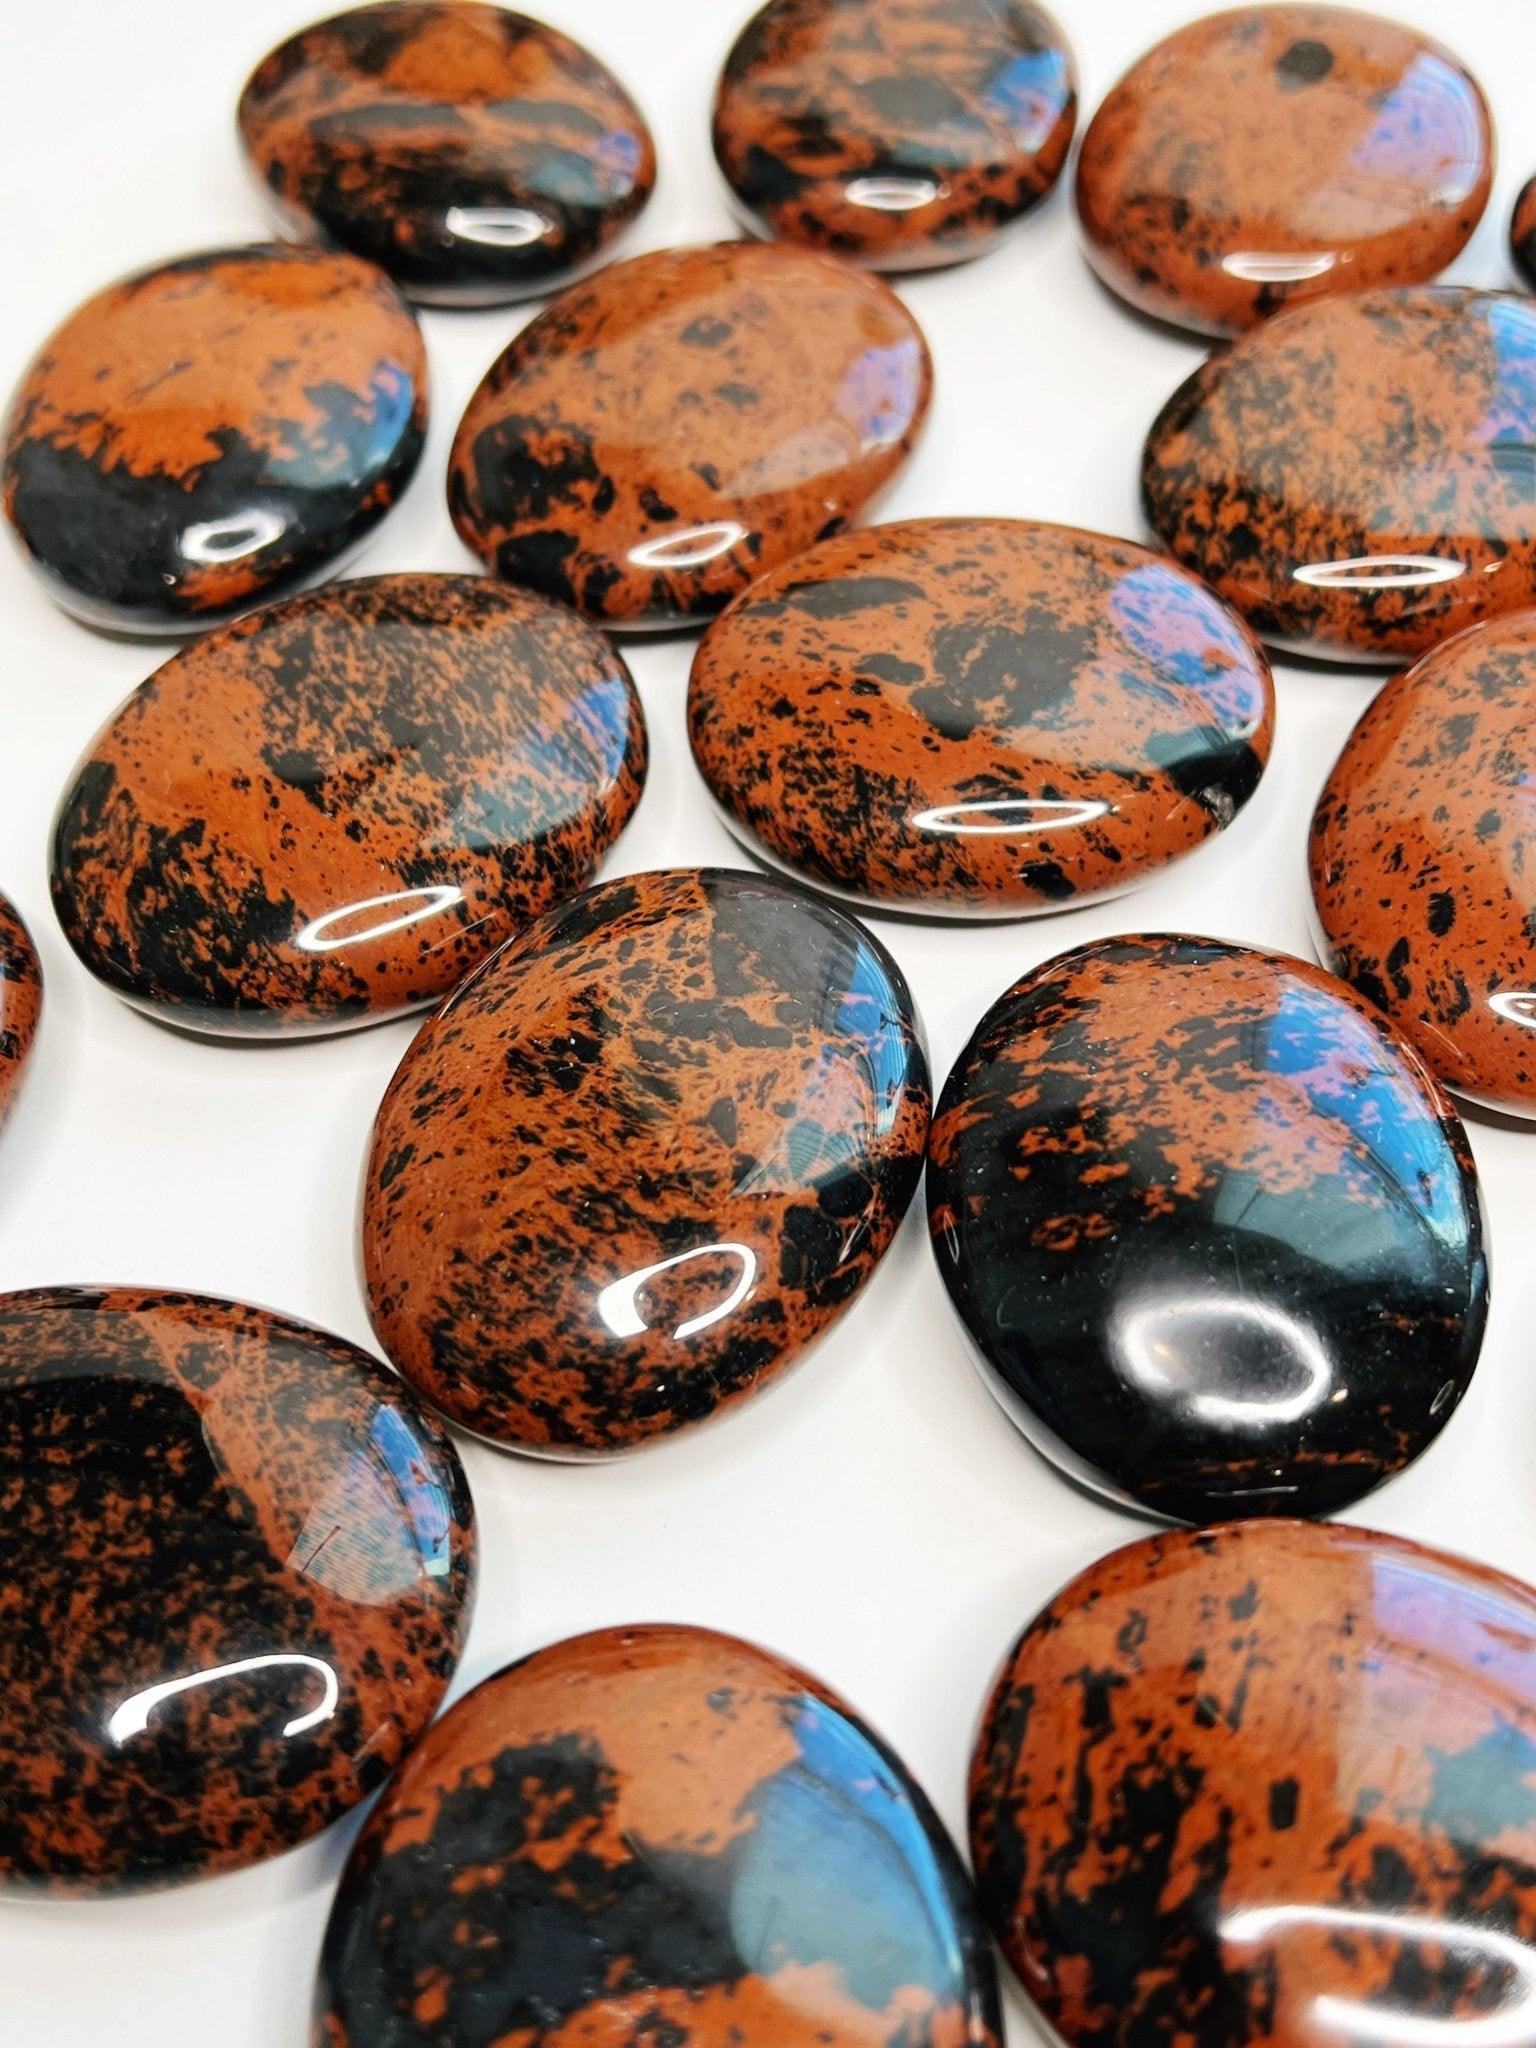 MAHOGANY OBSIDIAN PALM STONE - 33 bday, 444 sale, end of year sale, flash sale, holiday sale, mahogany obsidian, new year sale, obsidian, palm, palm stone, polished, protection gift bundle - The Mineral Maven